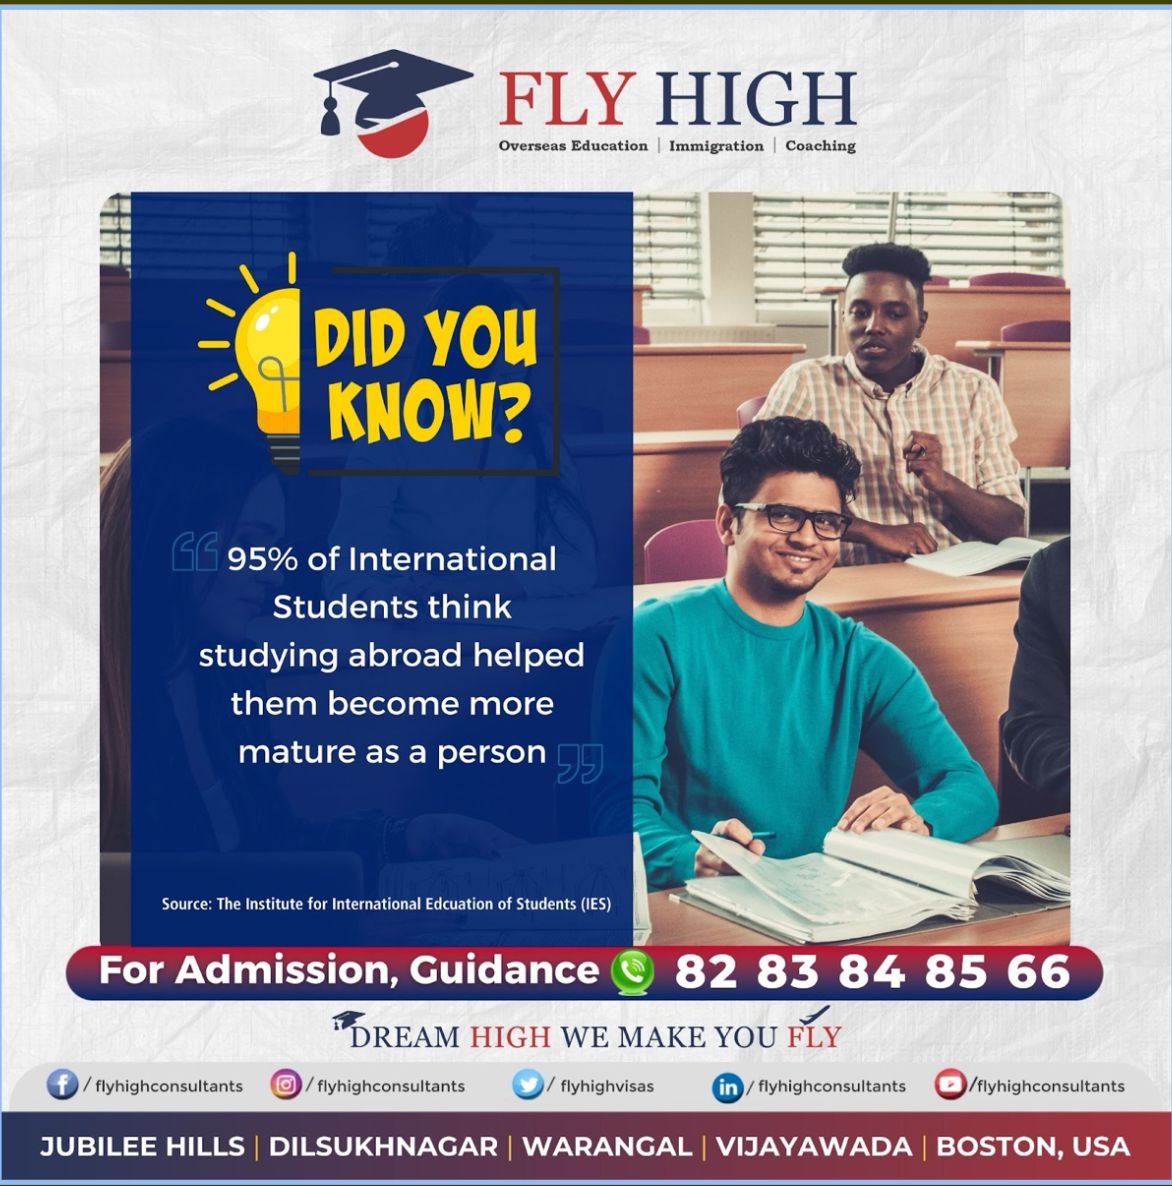 Did you know? 95% of #internationalstudents think #studyingabroad helped them become more mature as a person.
Looking for an #overseaseducation consultants, let #Flyhighconsultants make your dream a reality.
Contact us at : +91 8283848566